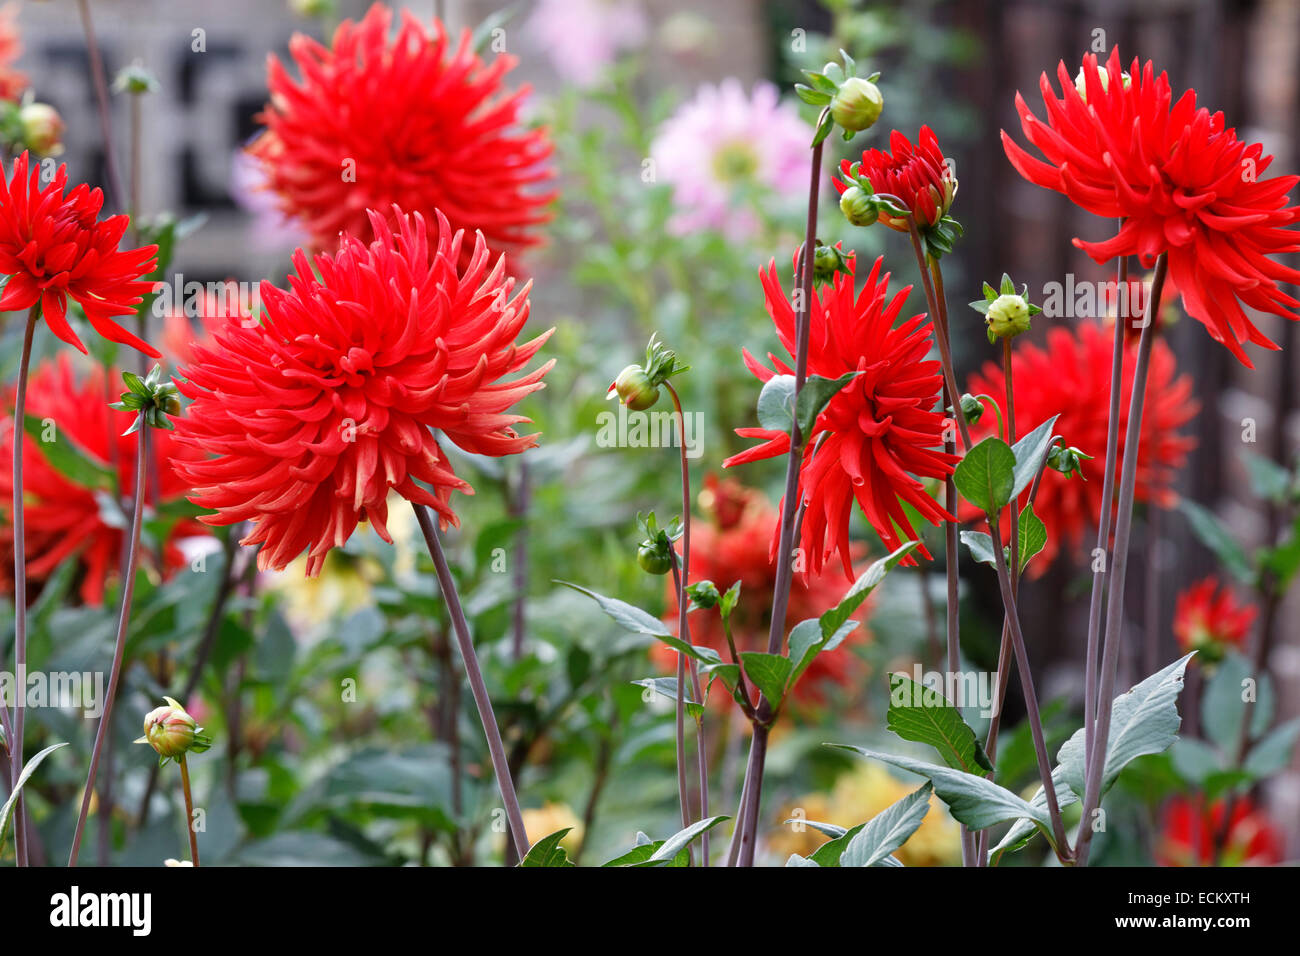 Red Cactus Dahlia 'Bergers Record' in flower border Stock Photo - Alamy